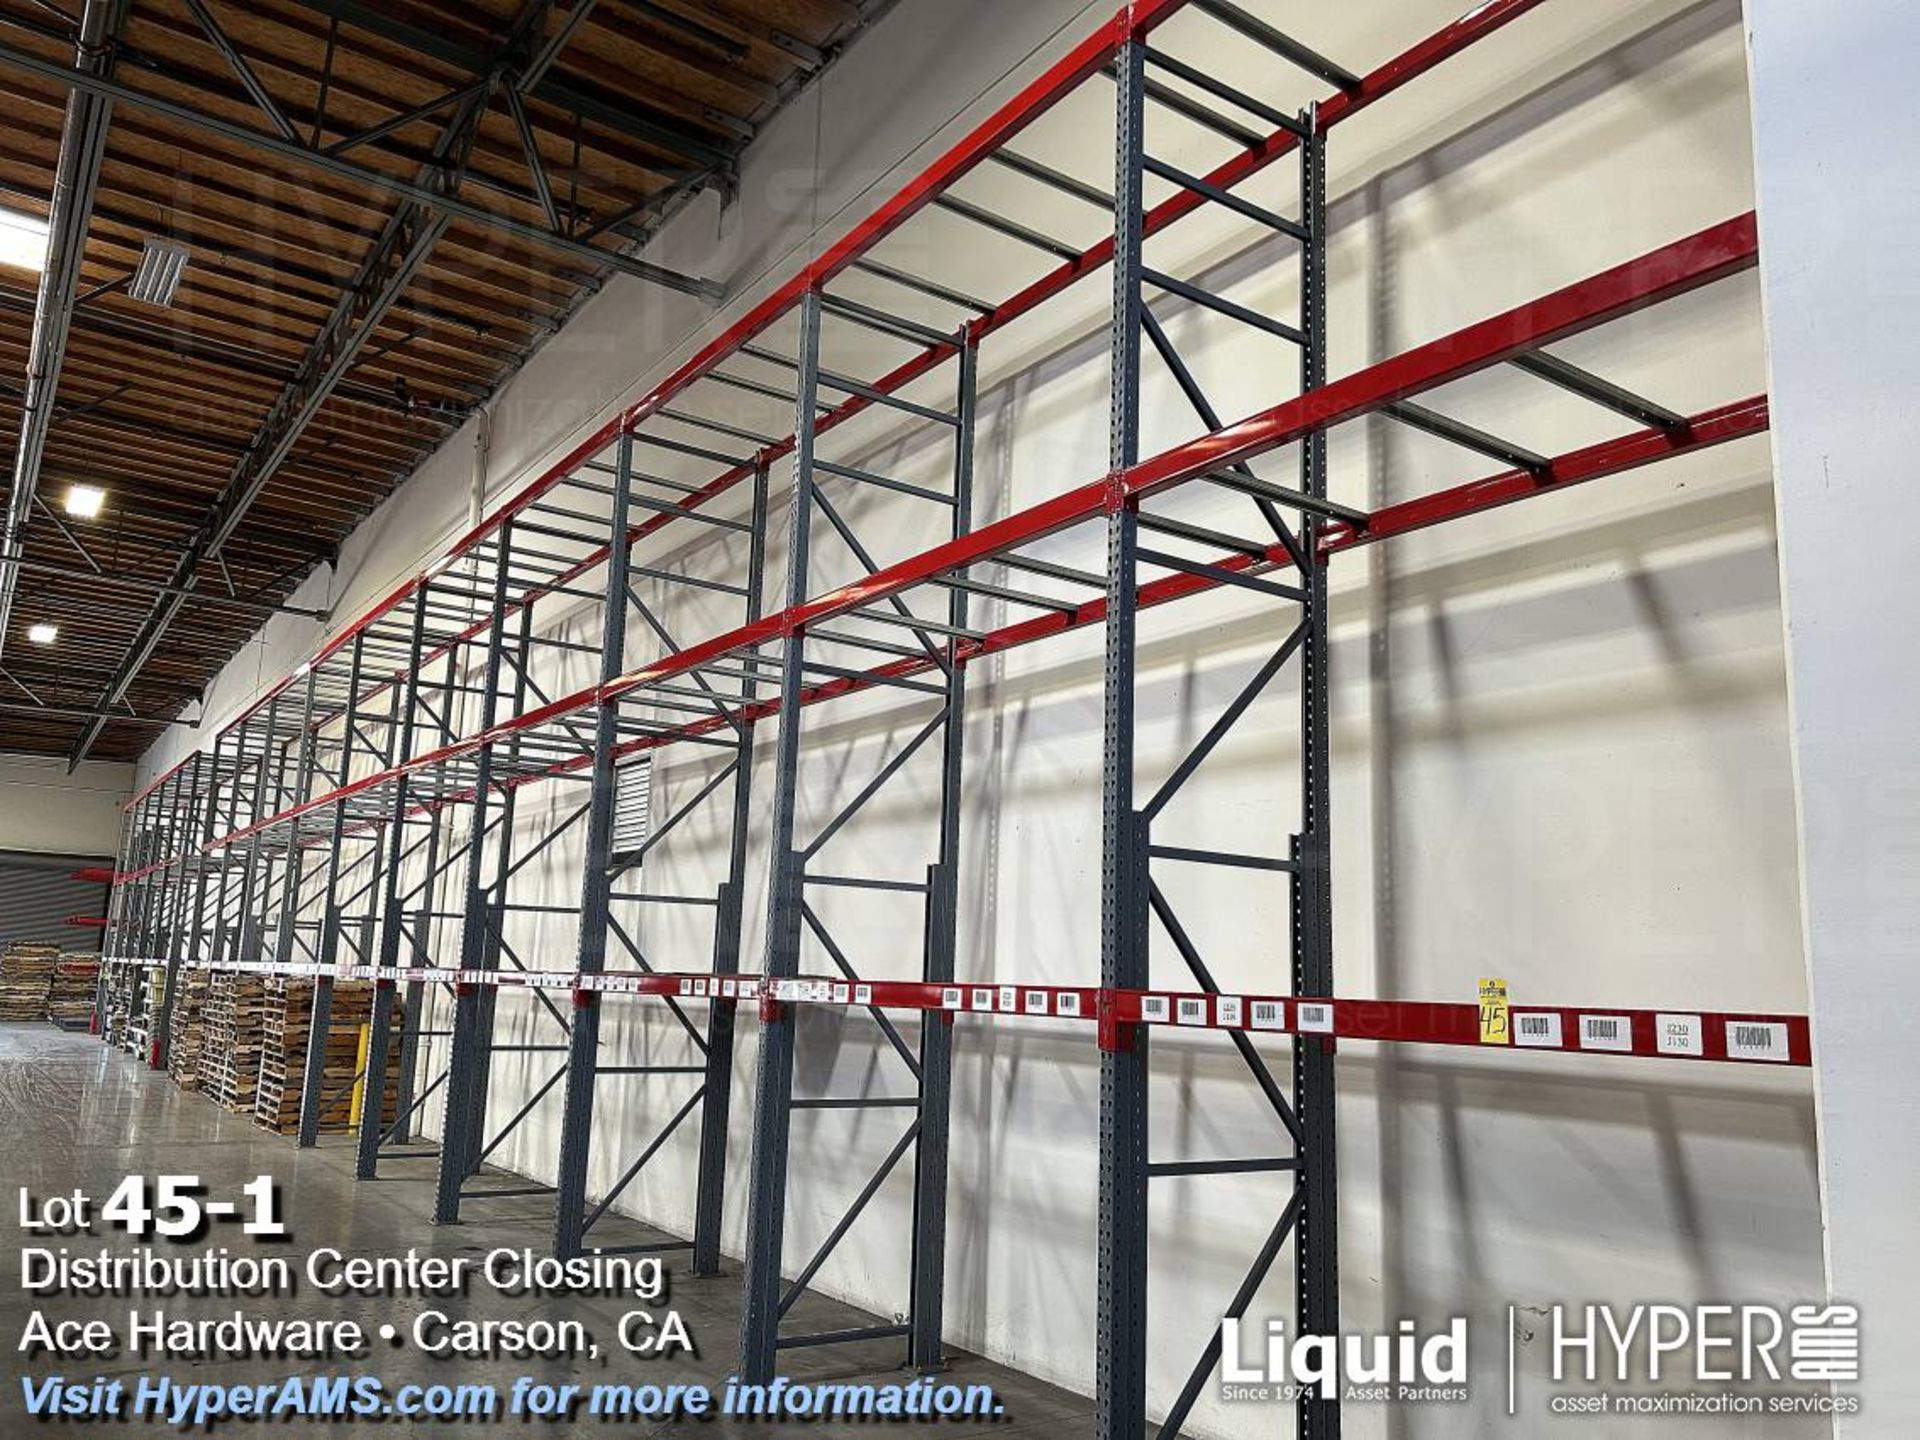 15 sections of HMH 12 teardrop pallet racking